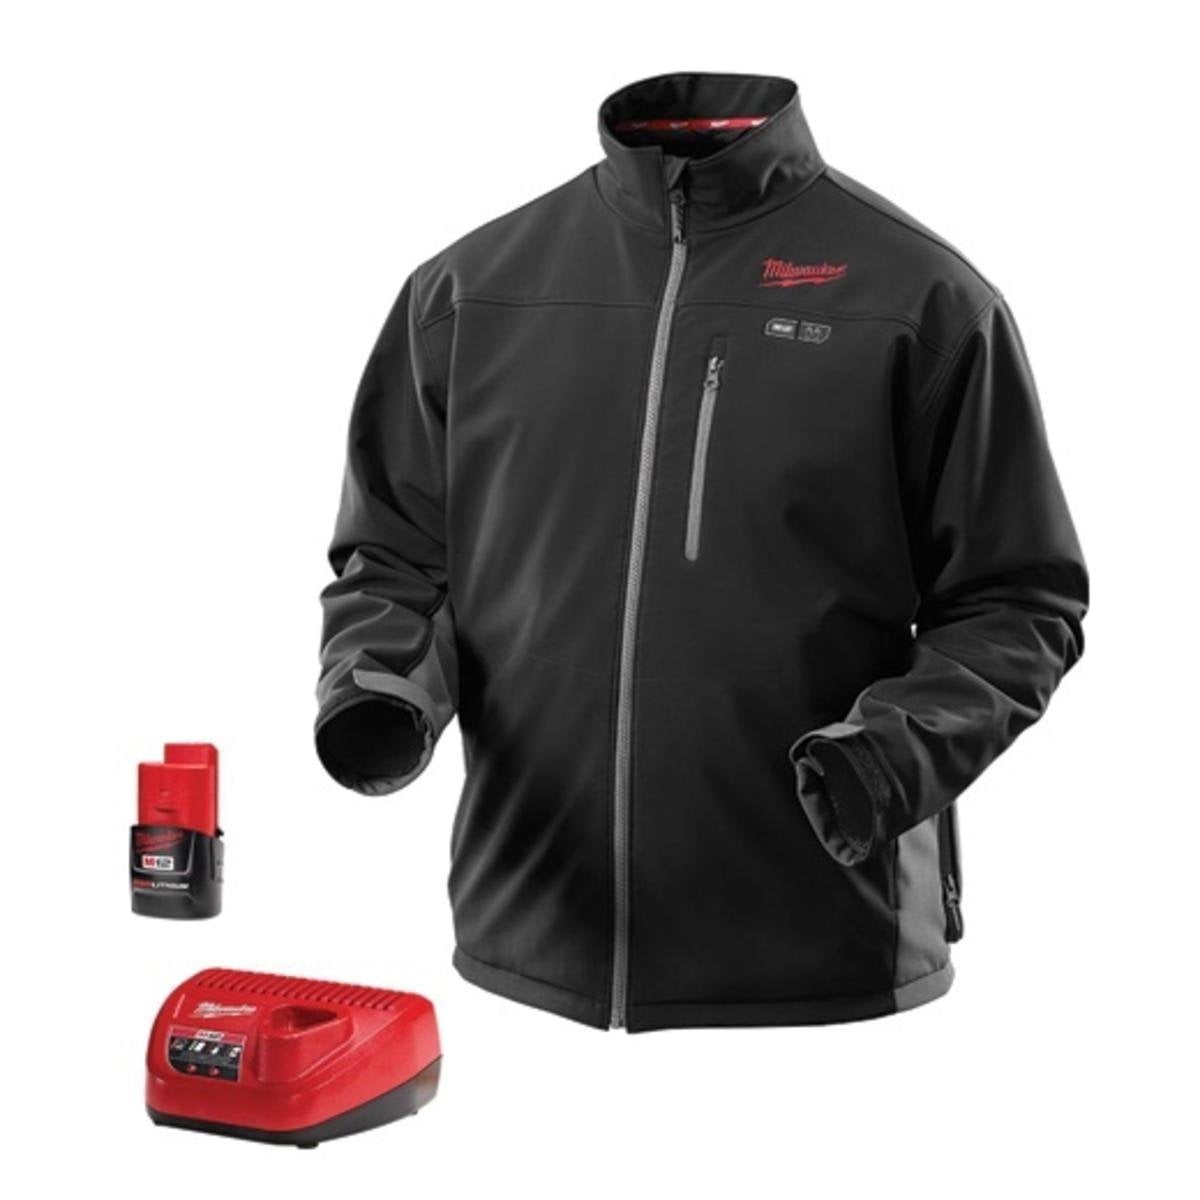 Battery Not Included - Small Black Color All Sizes Milwaukee Vest Only M12 12V Lithium-Ion Heated Front and Back Heat Zones 